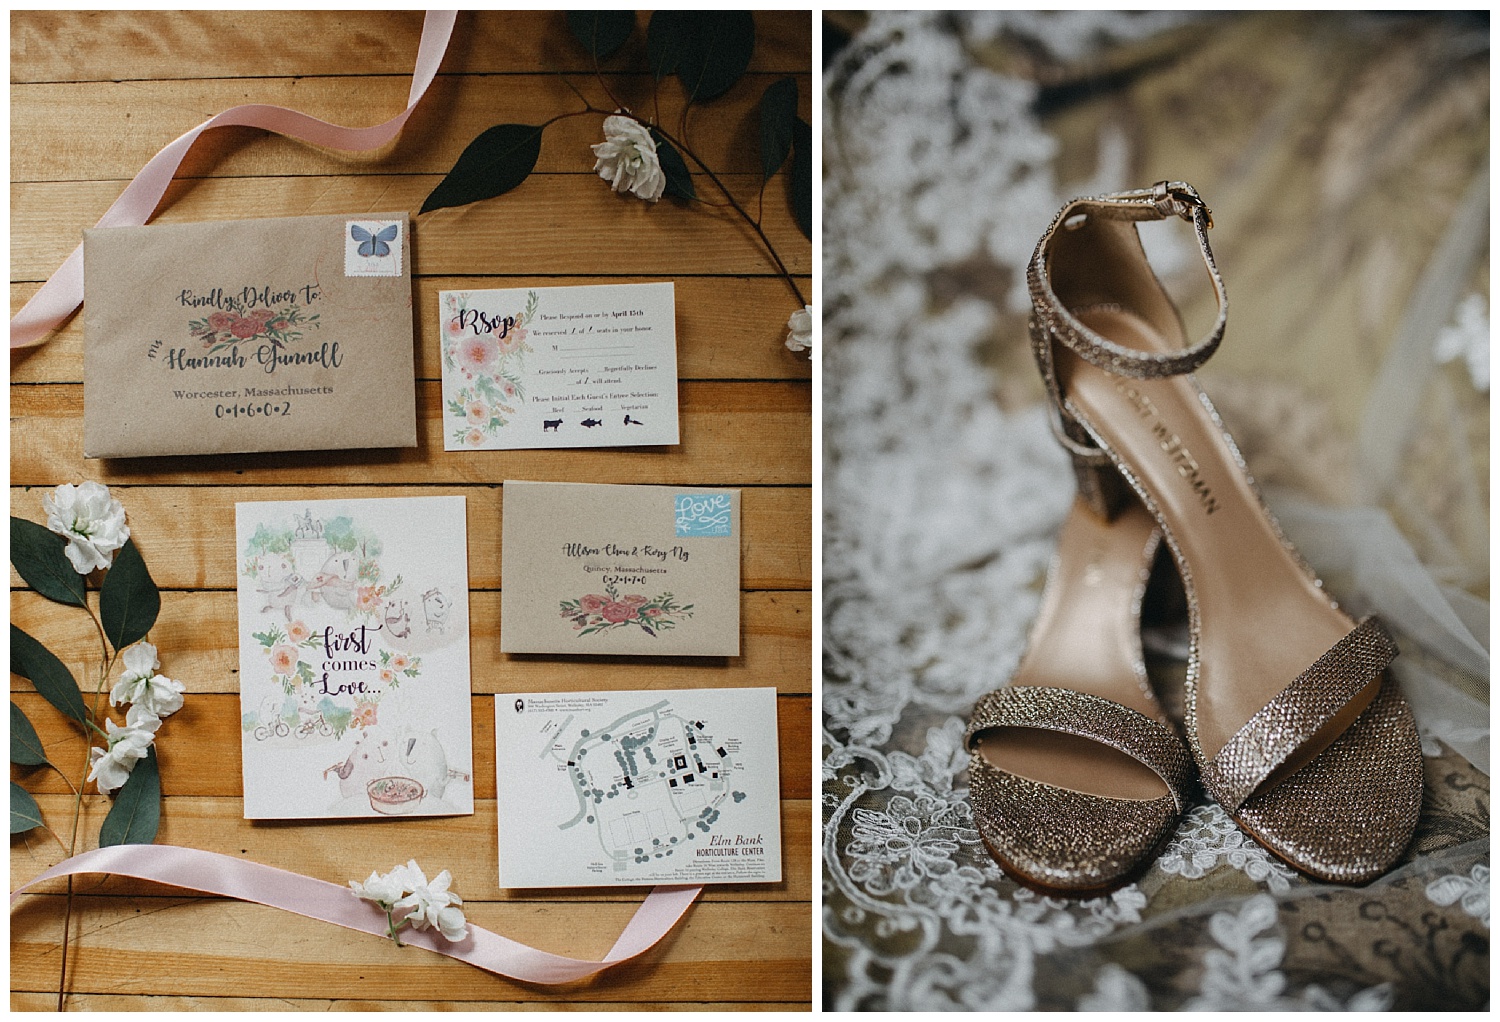 Handmade wedding invitation and gold shoes